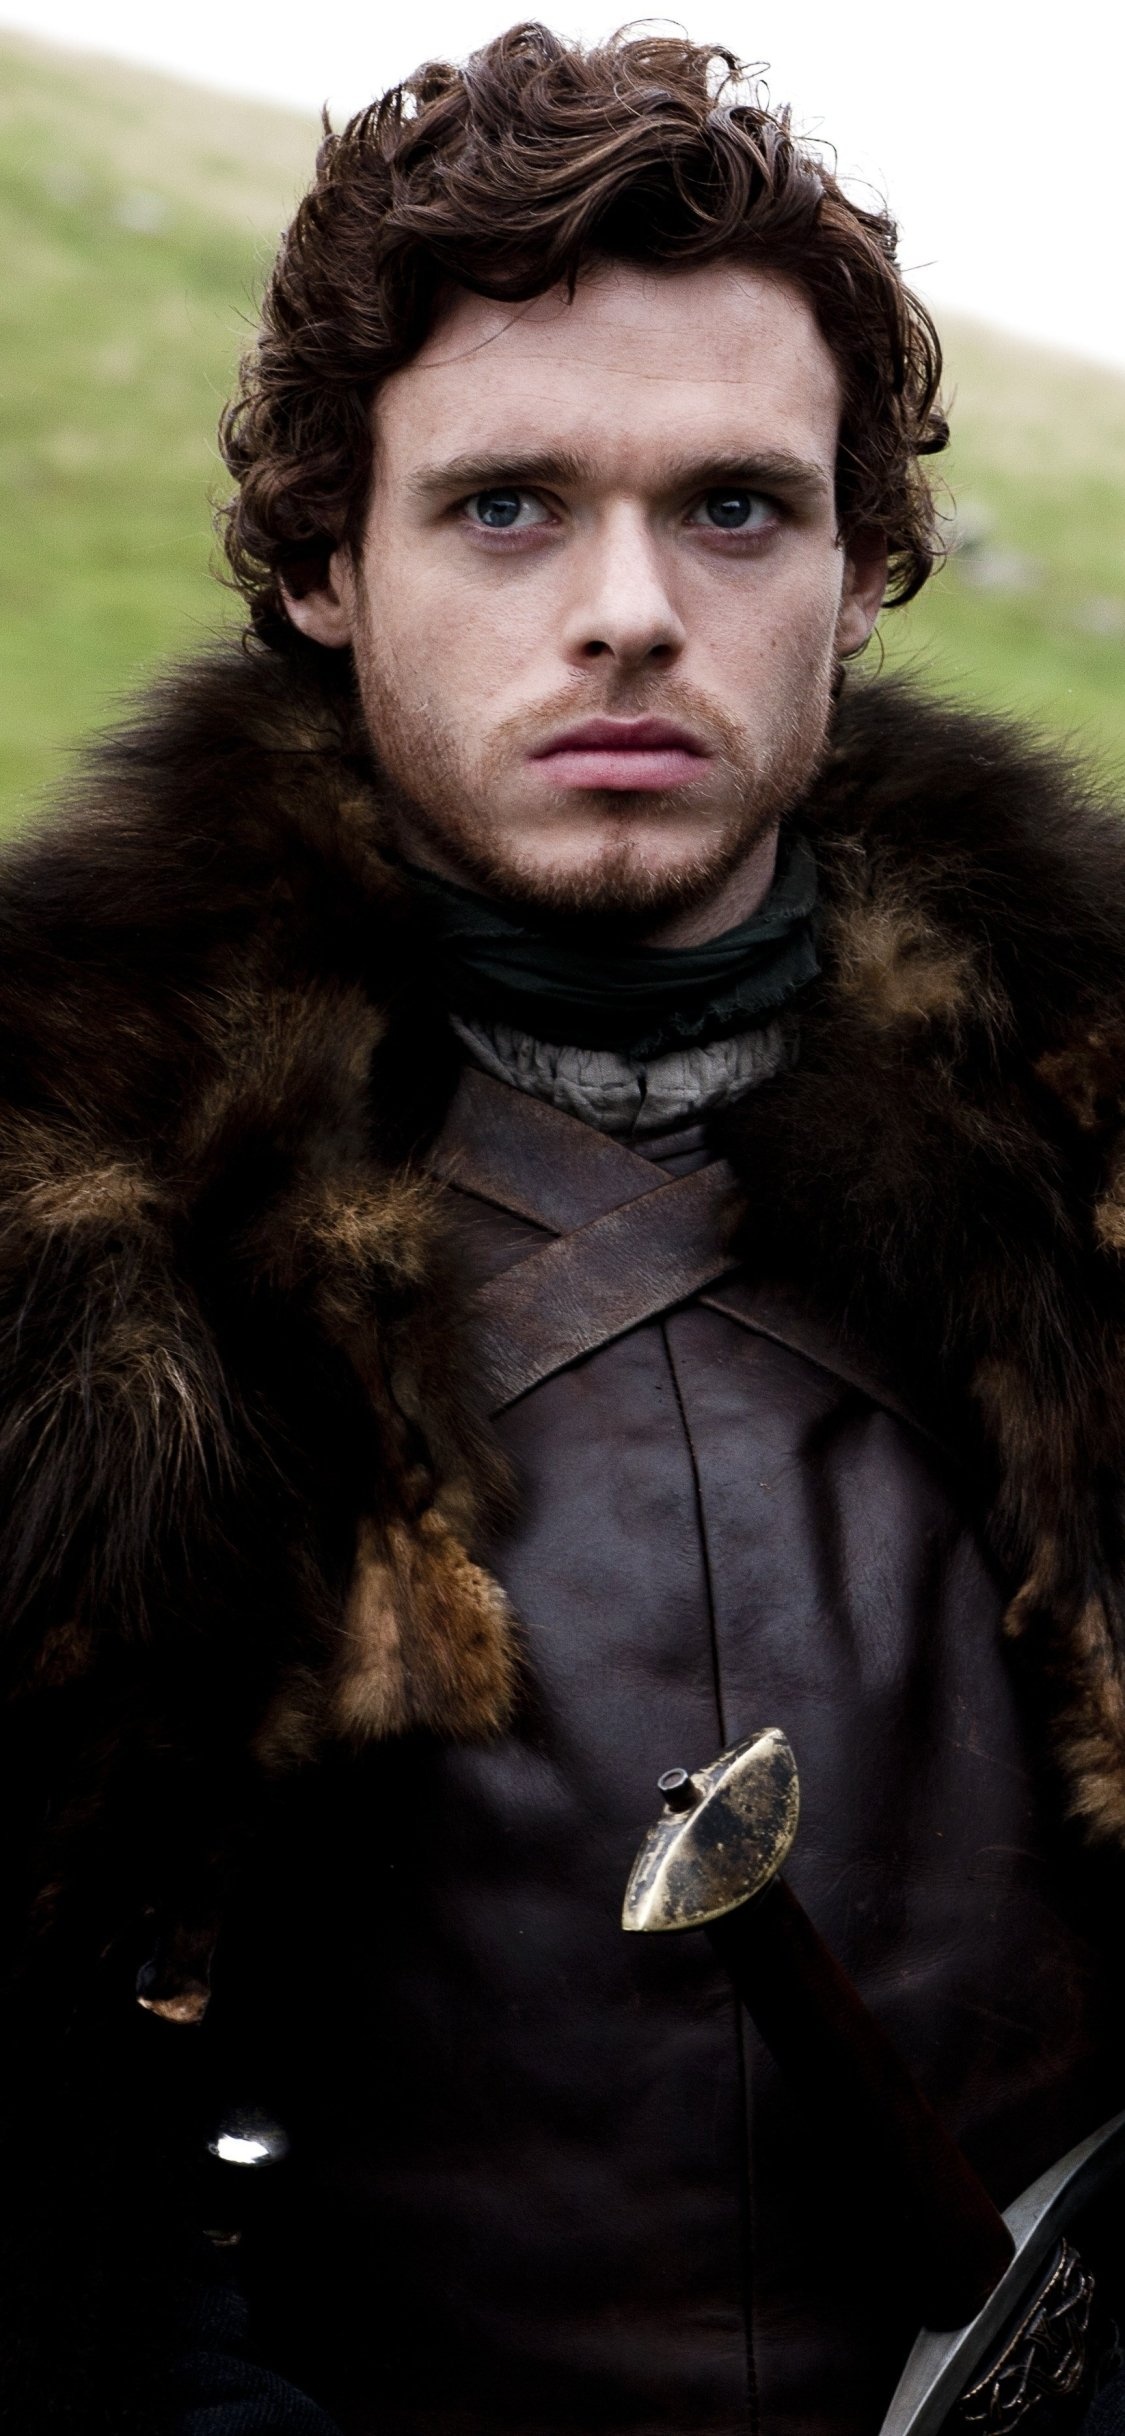 Richard Madden: TV show, The eldest son and heir of Lord Eddard Stark of Winterfell and Eddard's wife Lady Catelyn Stark. 1130x2440 HD Background.